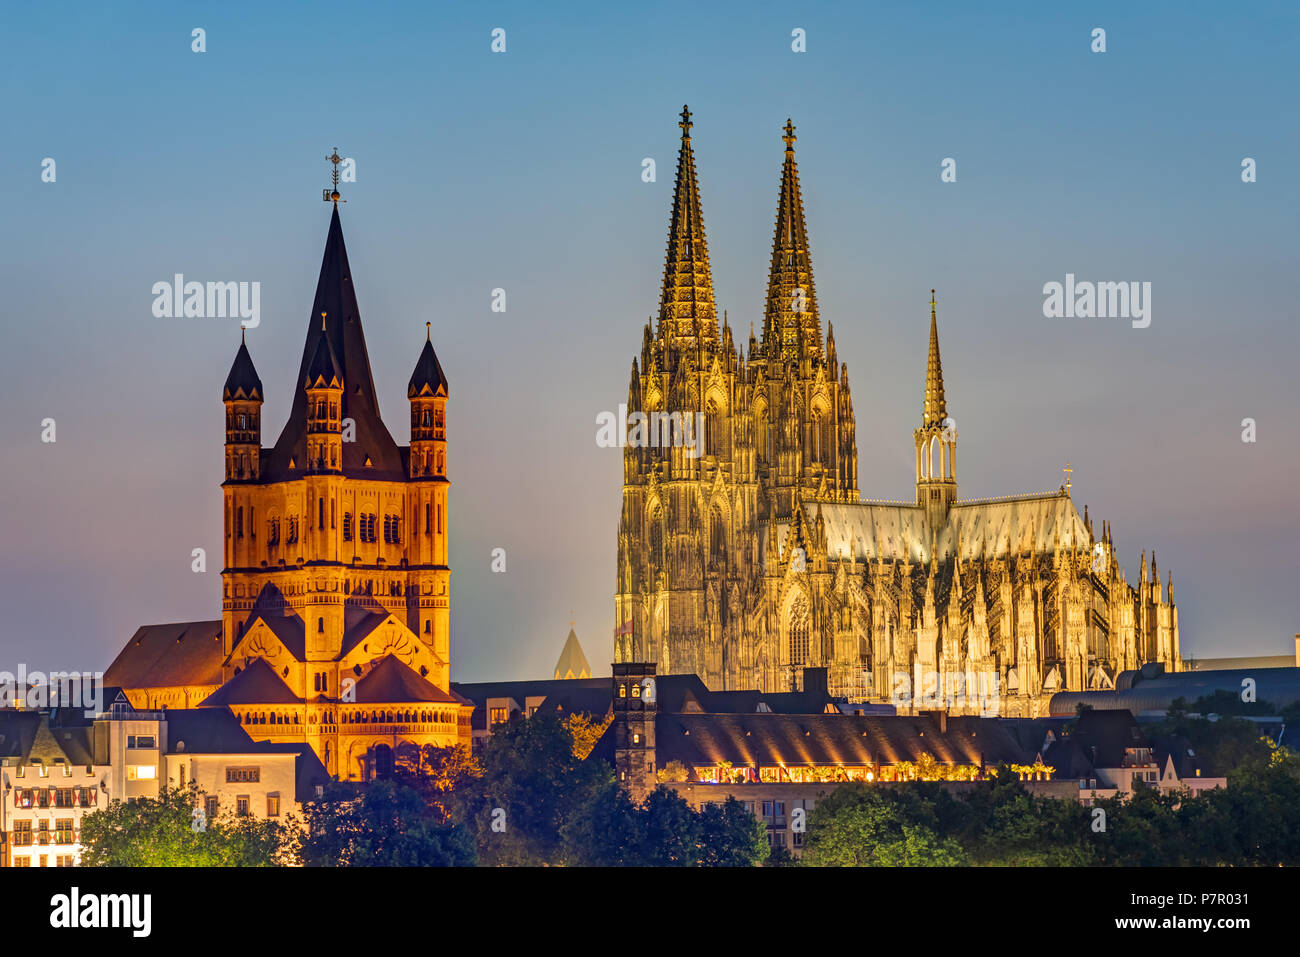 The famous cathedral and Great St. Martin Church in Cologne at dusk Stock Photo